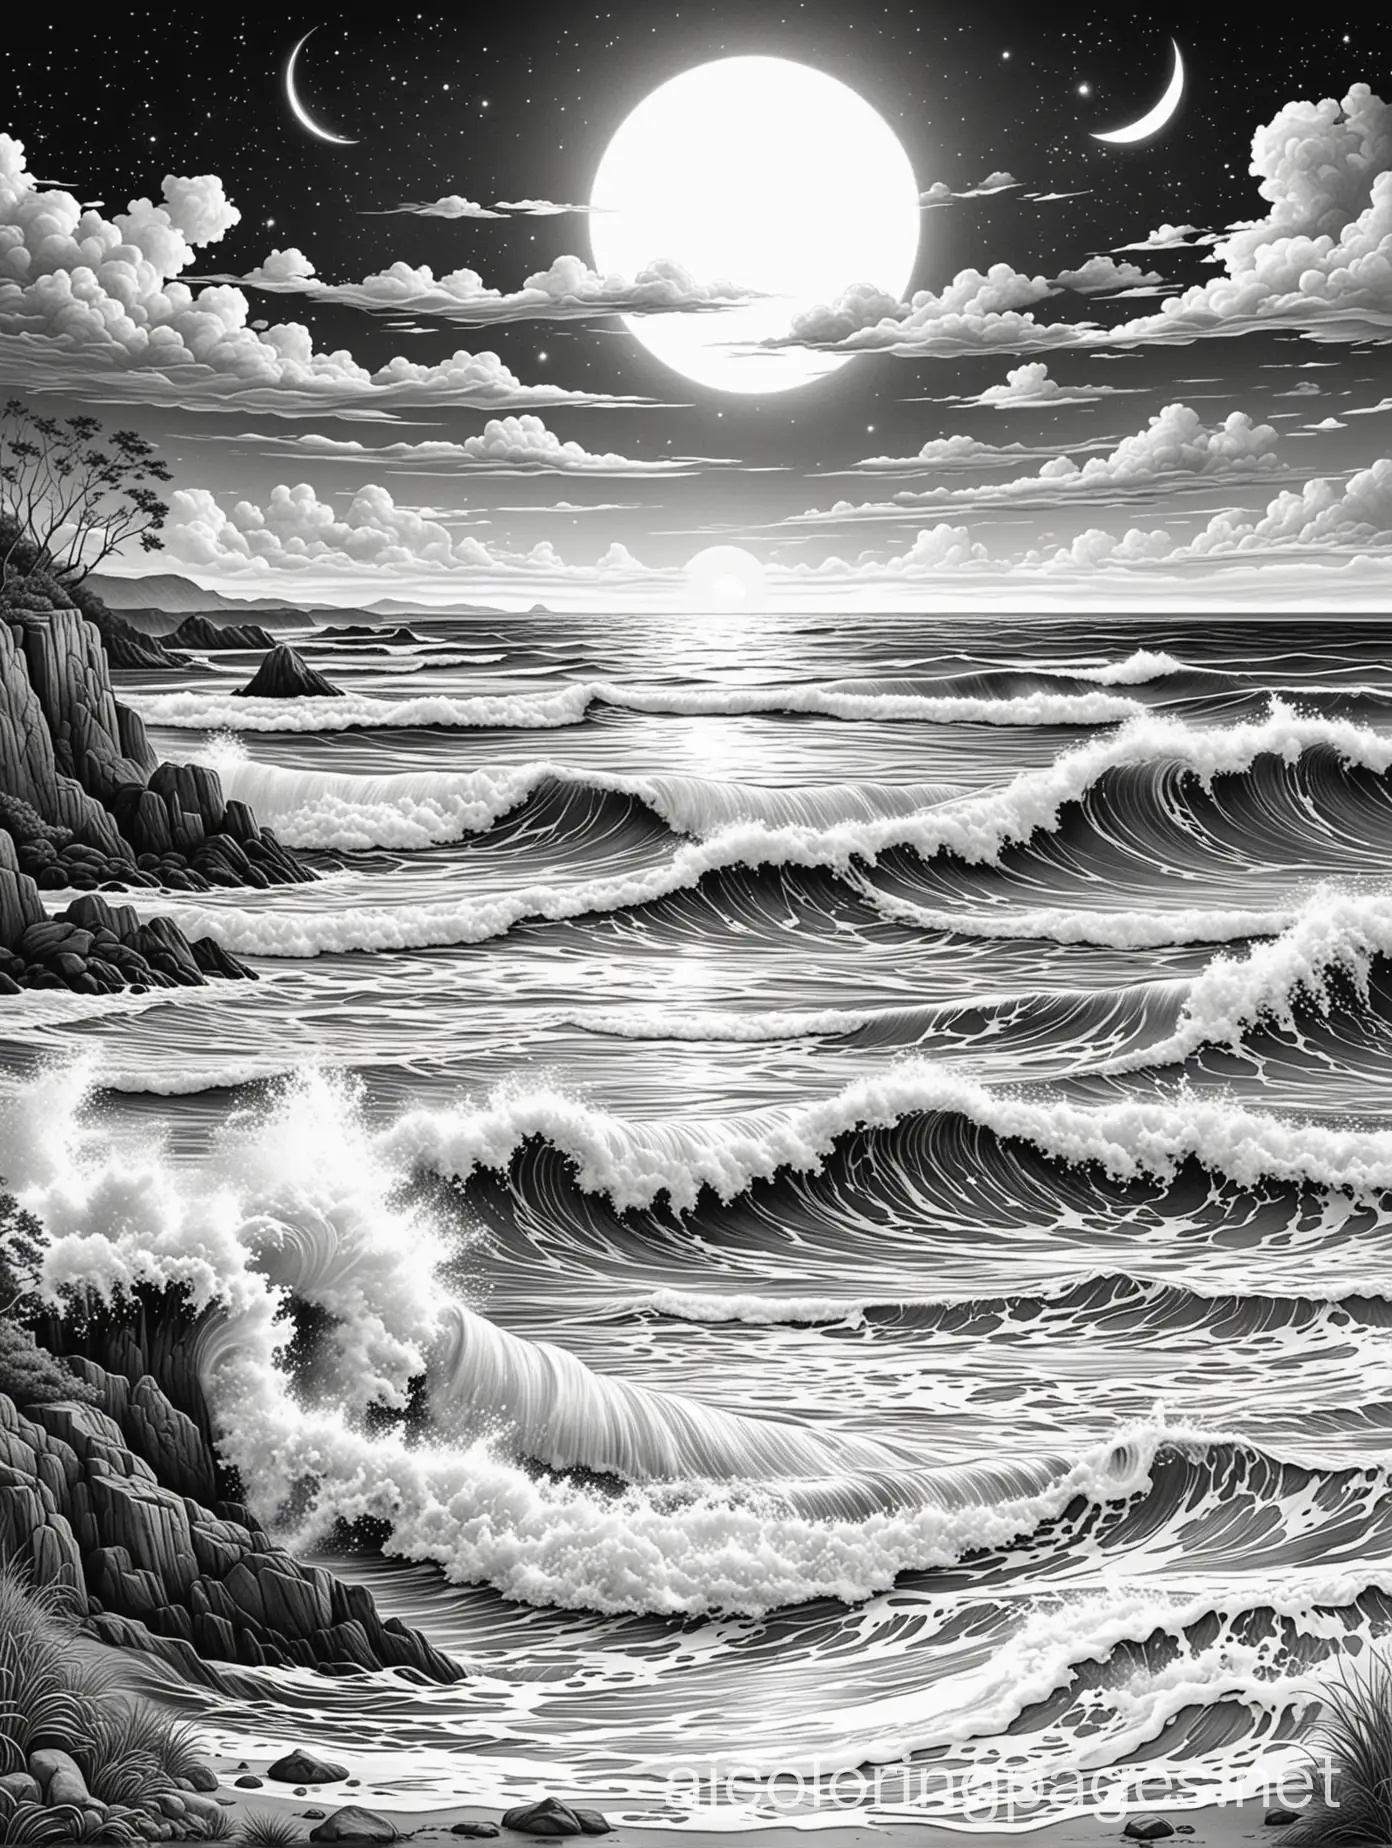 Moonlit-Beach-Scene-with-Crashing-Waves-Coloring-Page-Line-Art